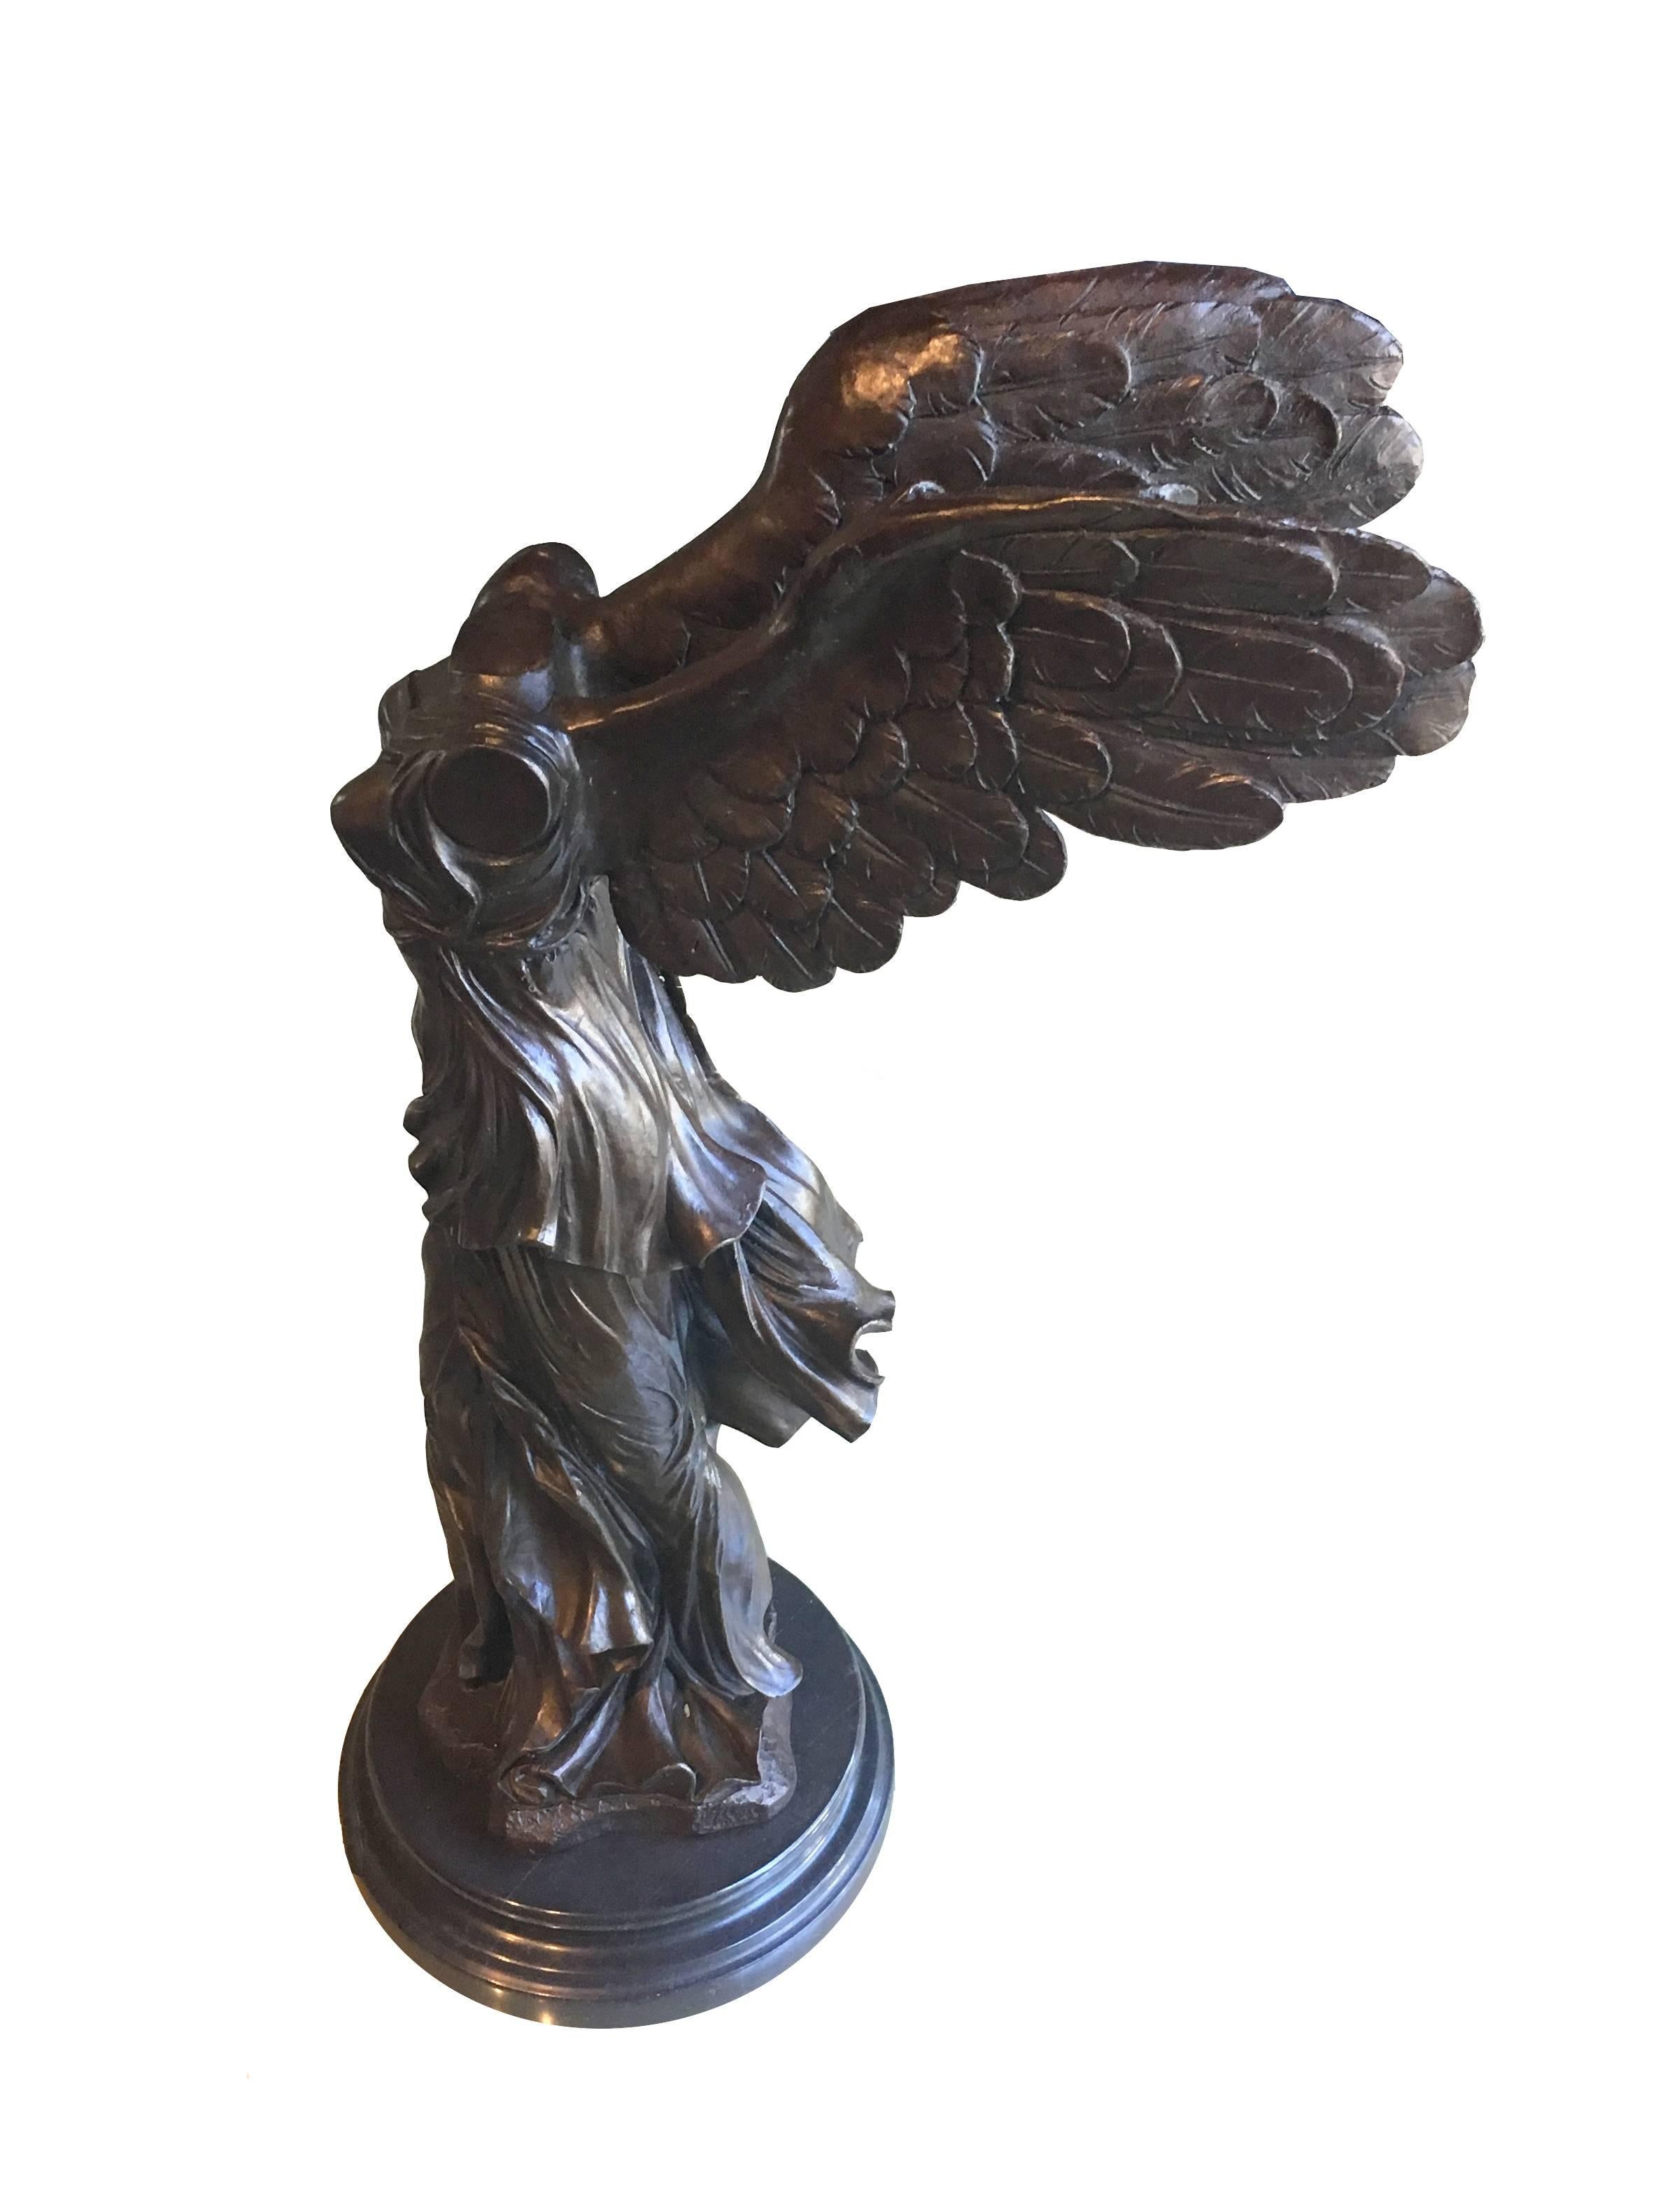 Contemporary heavy cast bronze reproduction of a 19th century winged sculpture of victory NIKE of Samothrace, with beautiful patina and placed on a polished marble base. Signed by Milo.

